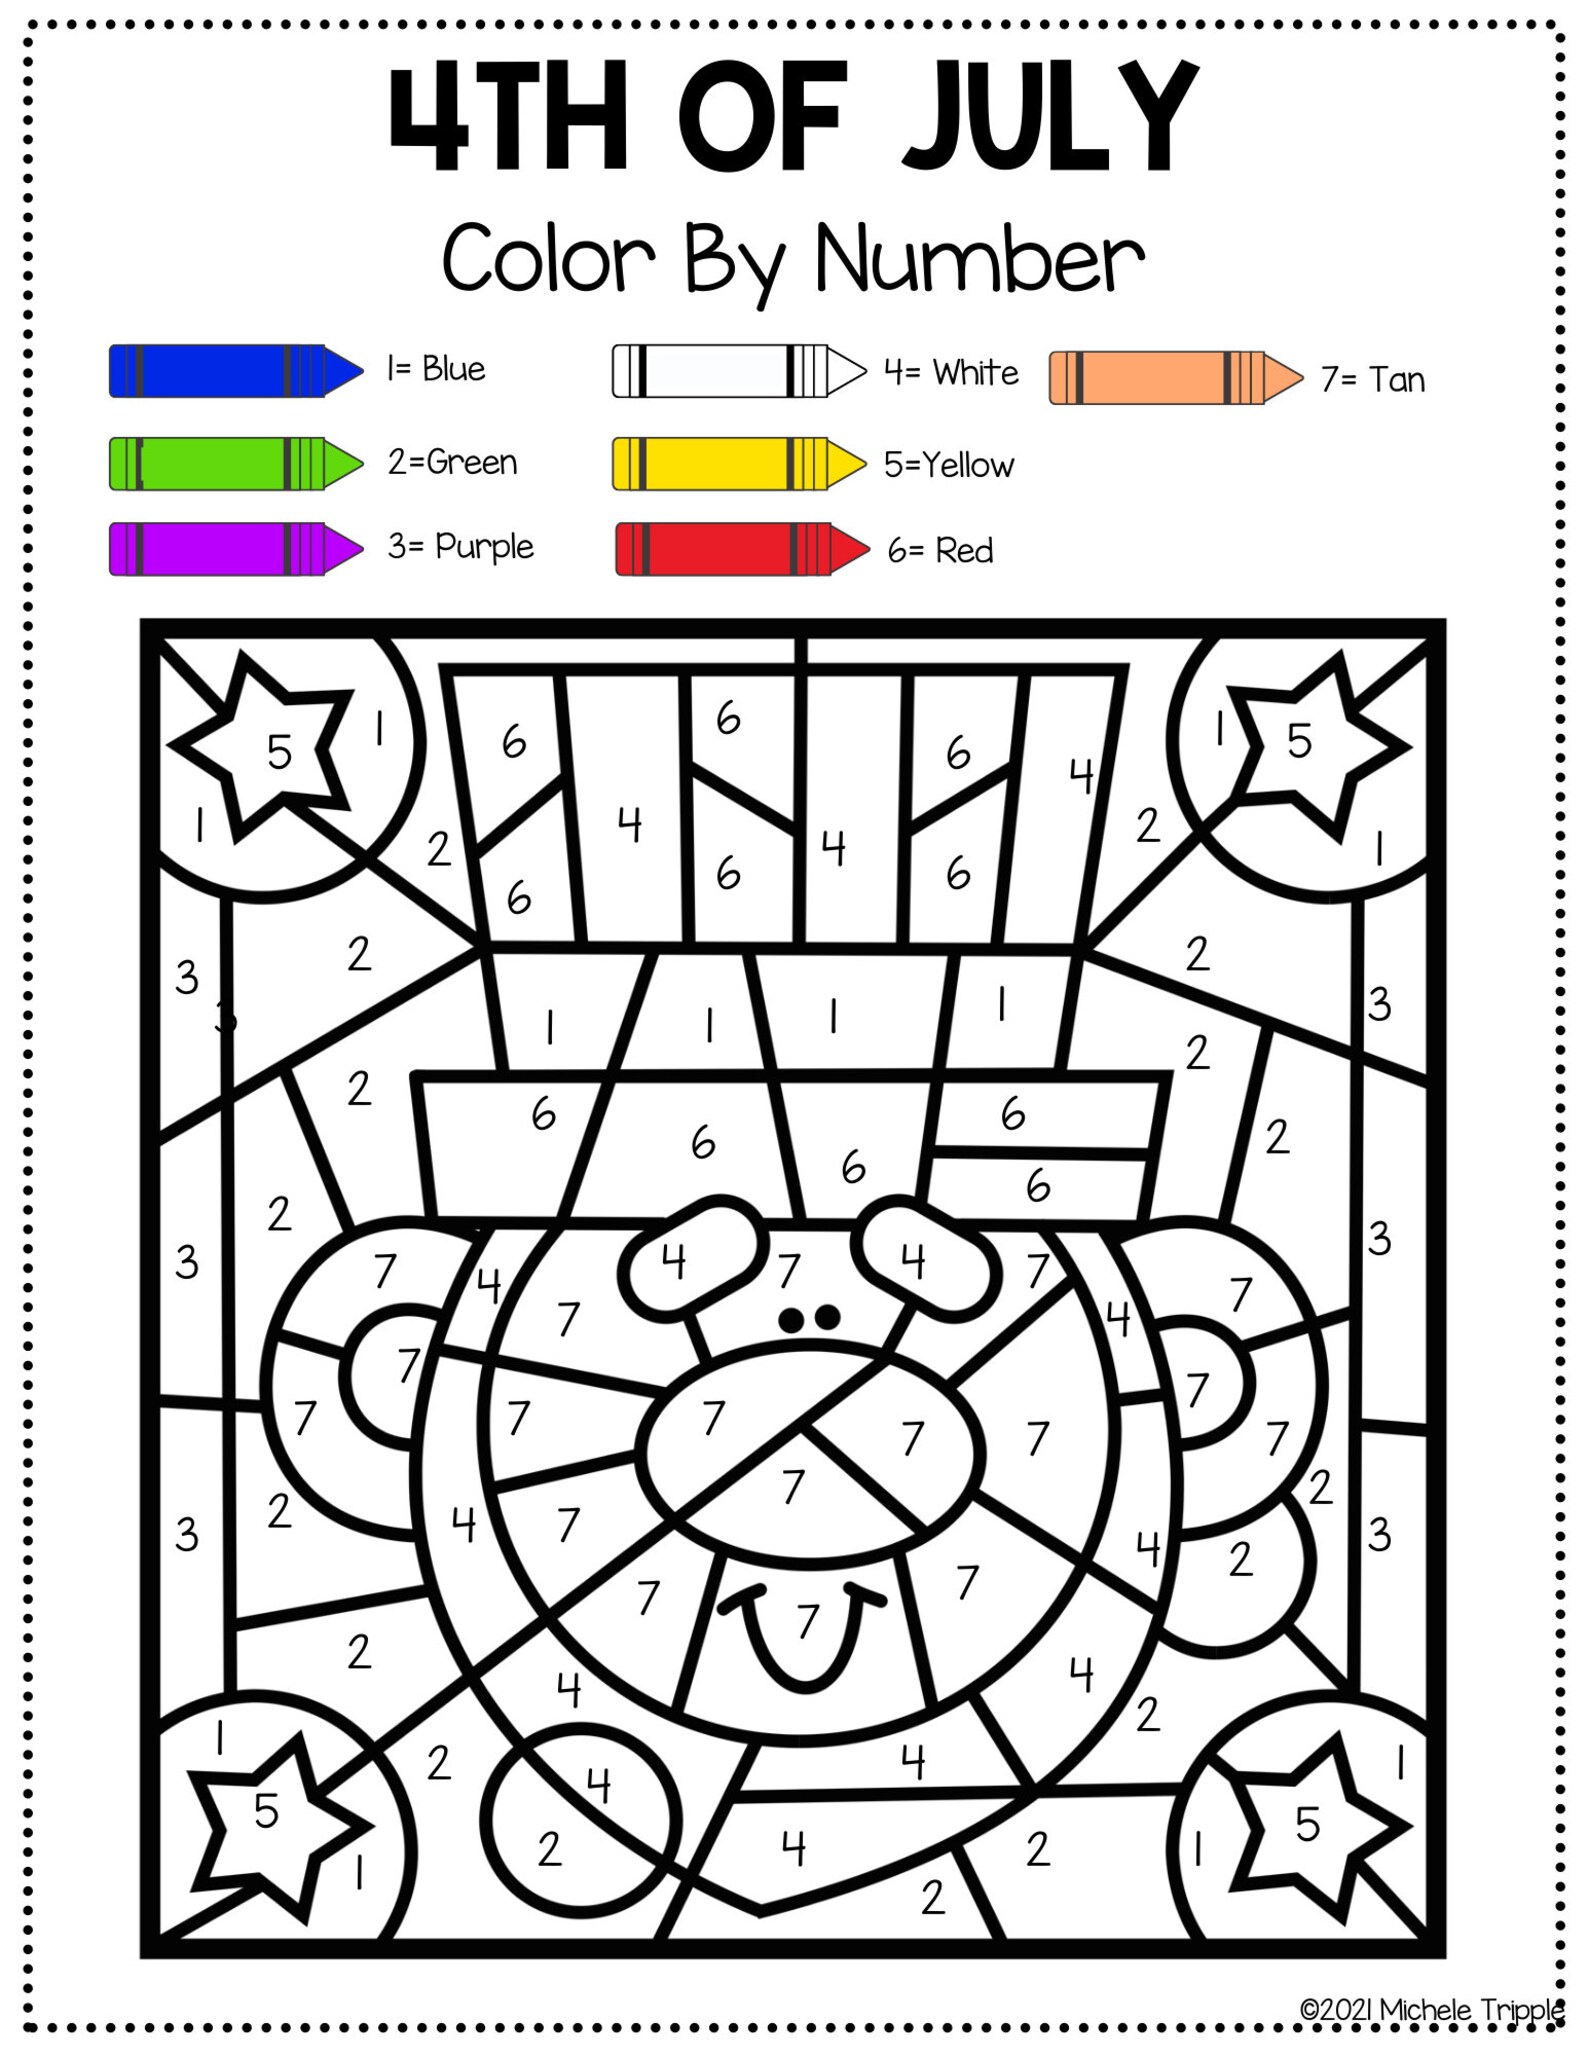 4th Of July Color By Number Sheets Are Perfect Activity For Kindergarten Color Guide For Kids